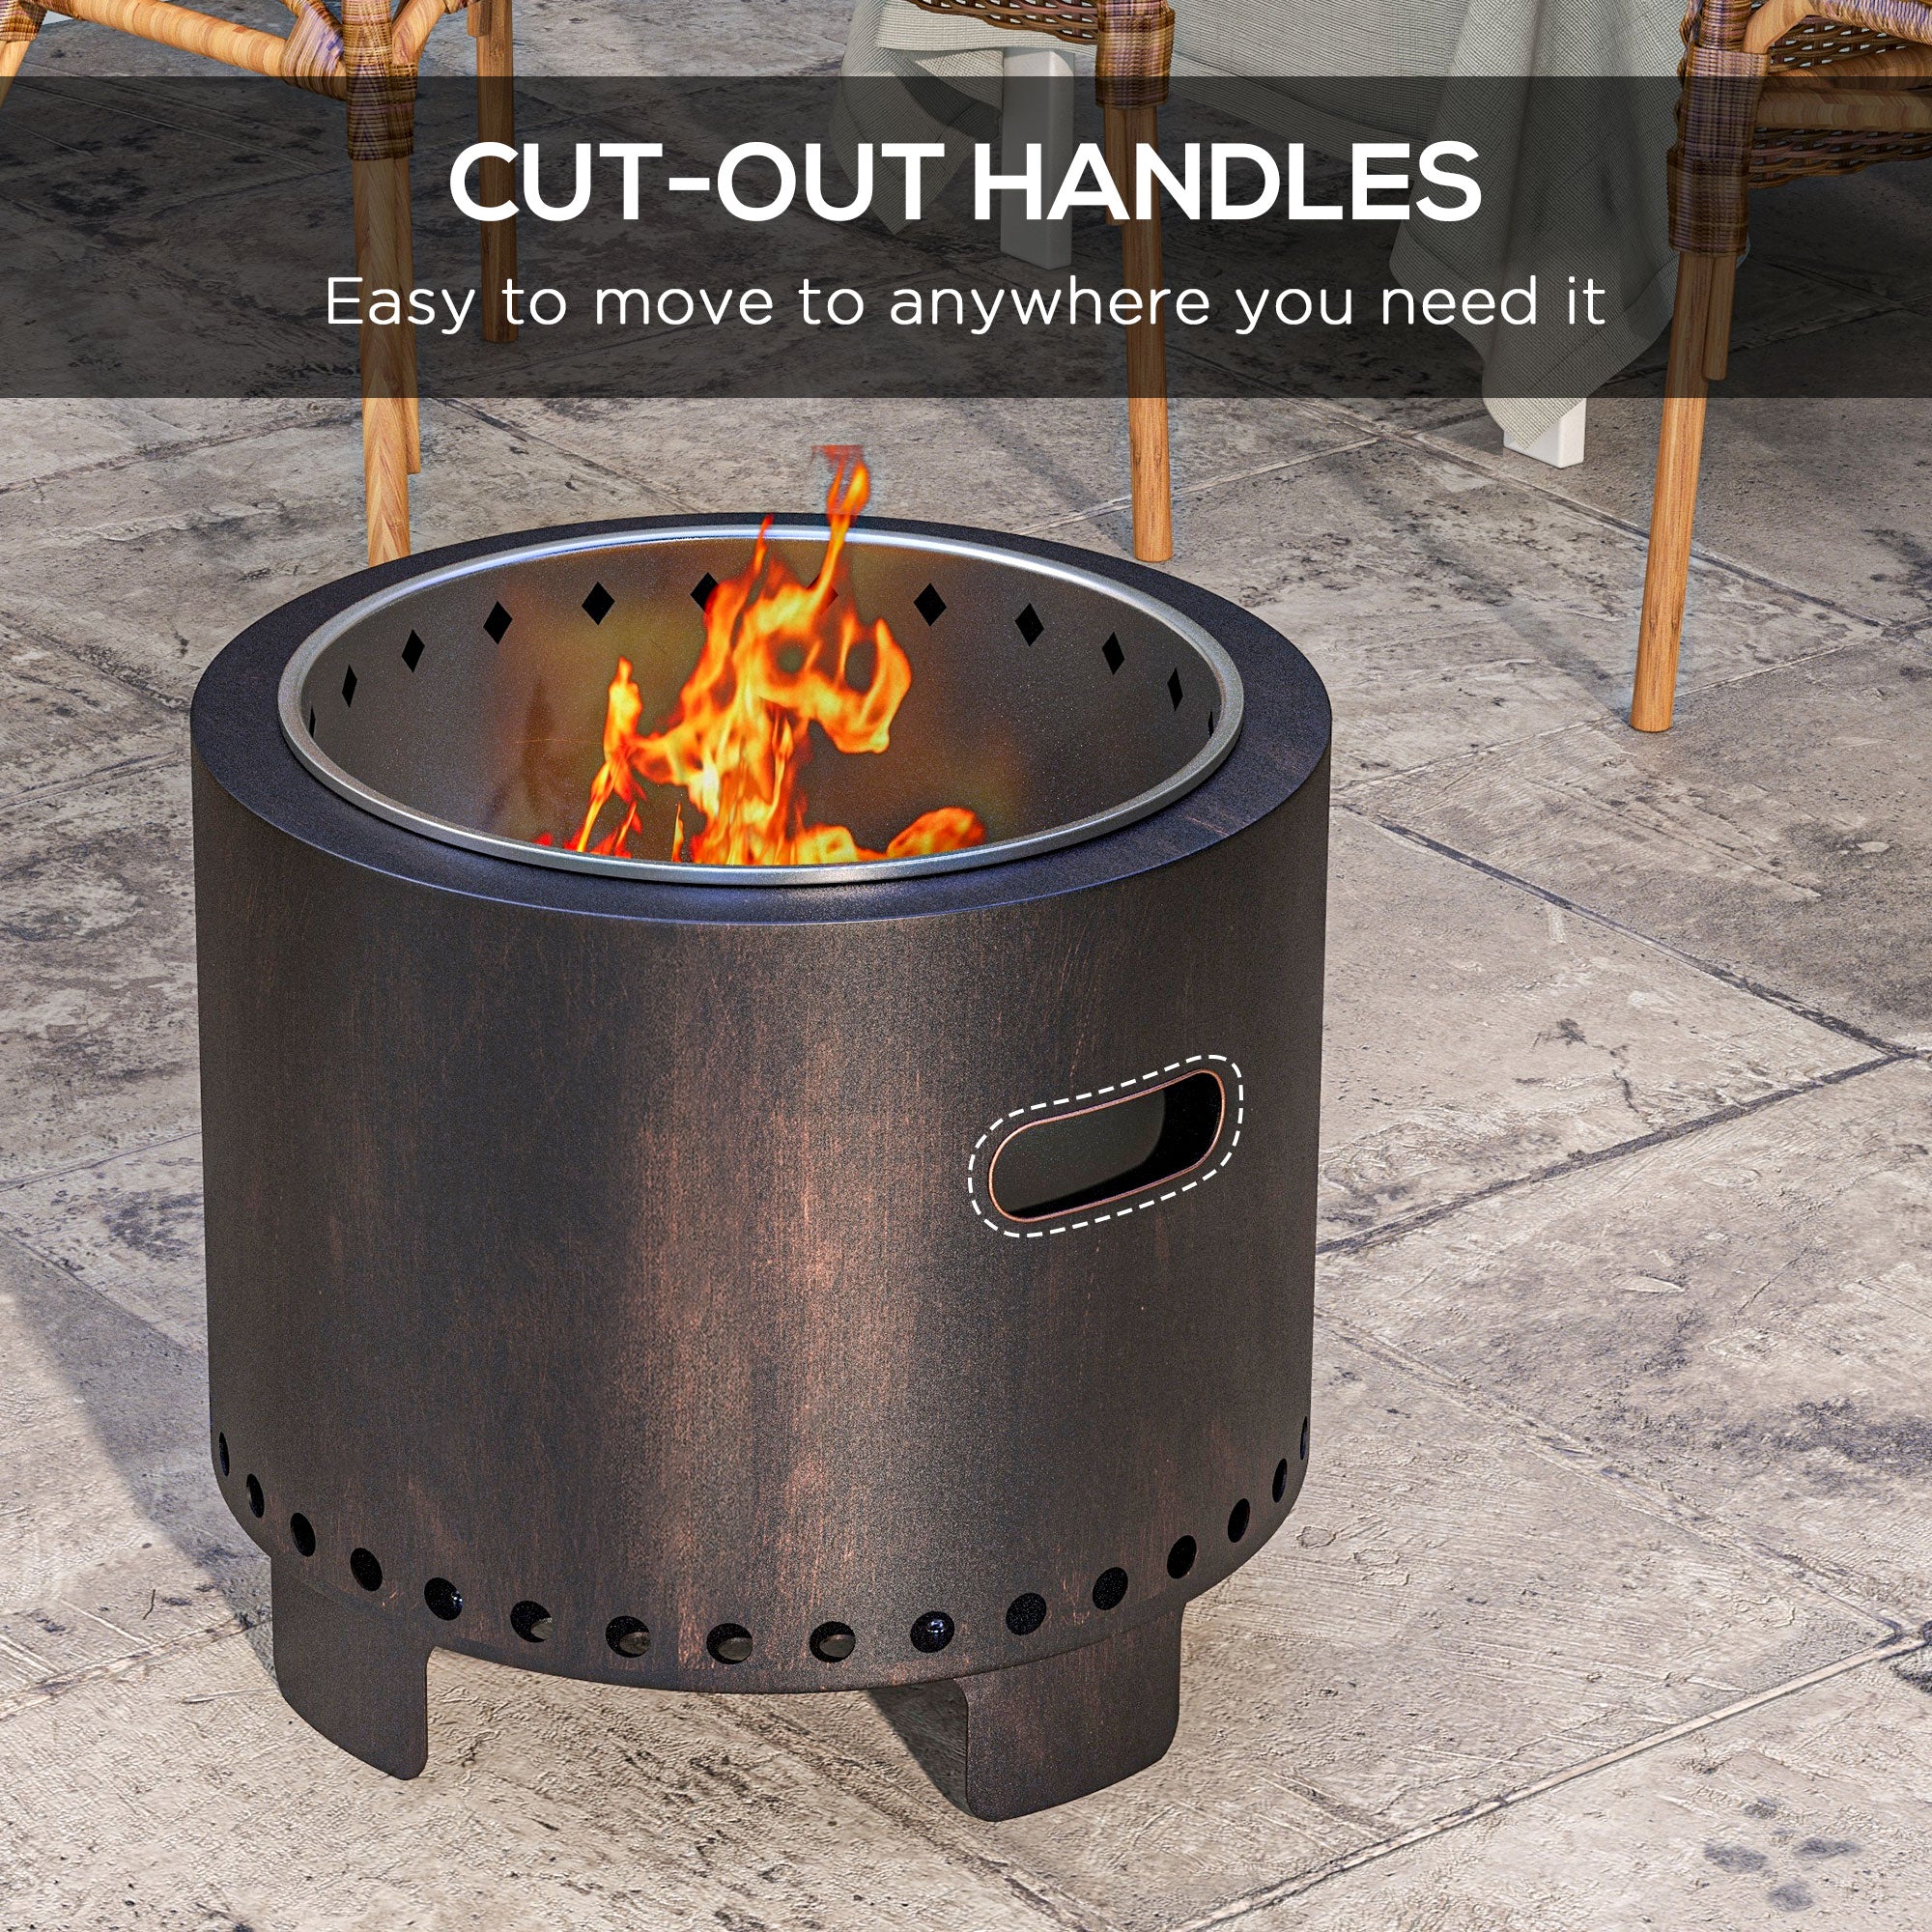 Outsunny Metal Wood-burning Smokeless Fire Pit, Black